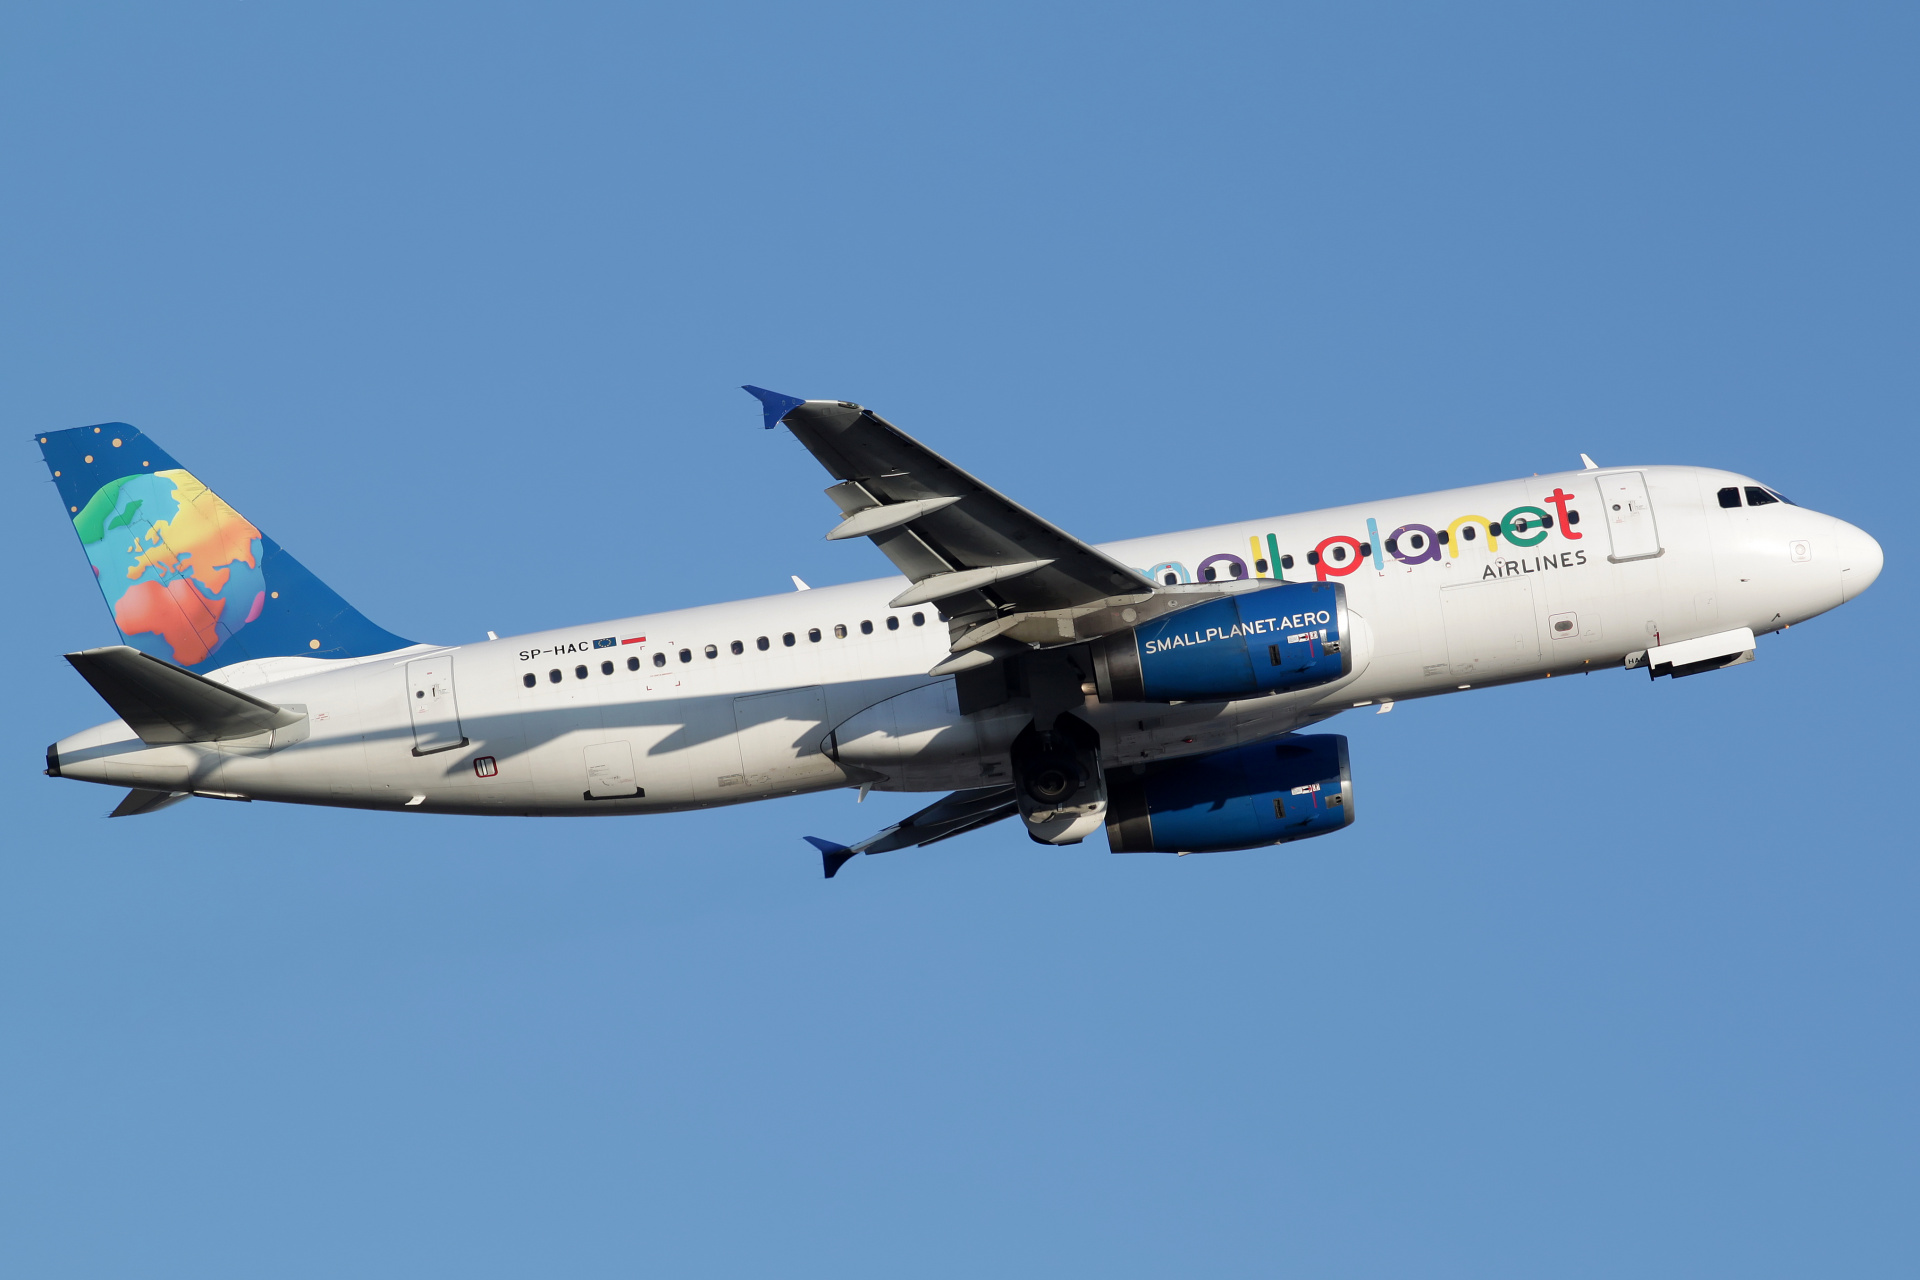 SP-HAC (Samoloty » Spotting na EPWA » Airbus A320-200 » Small Planet Airlines)